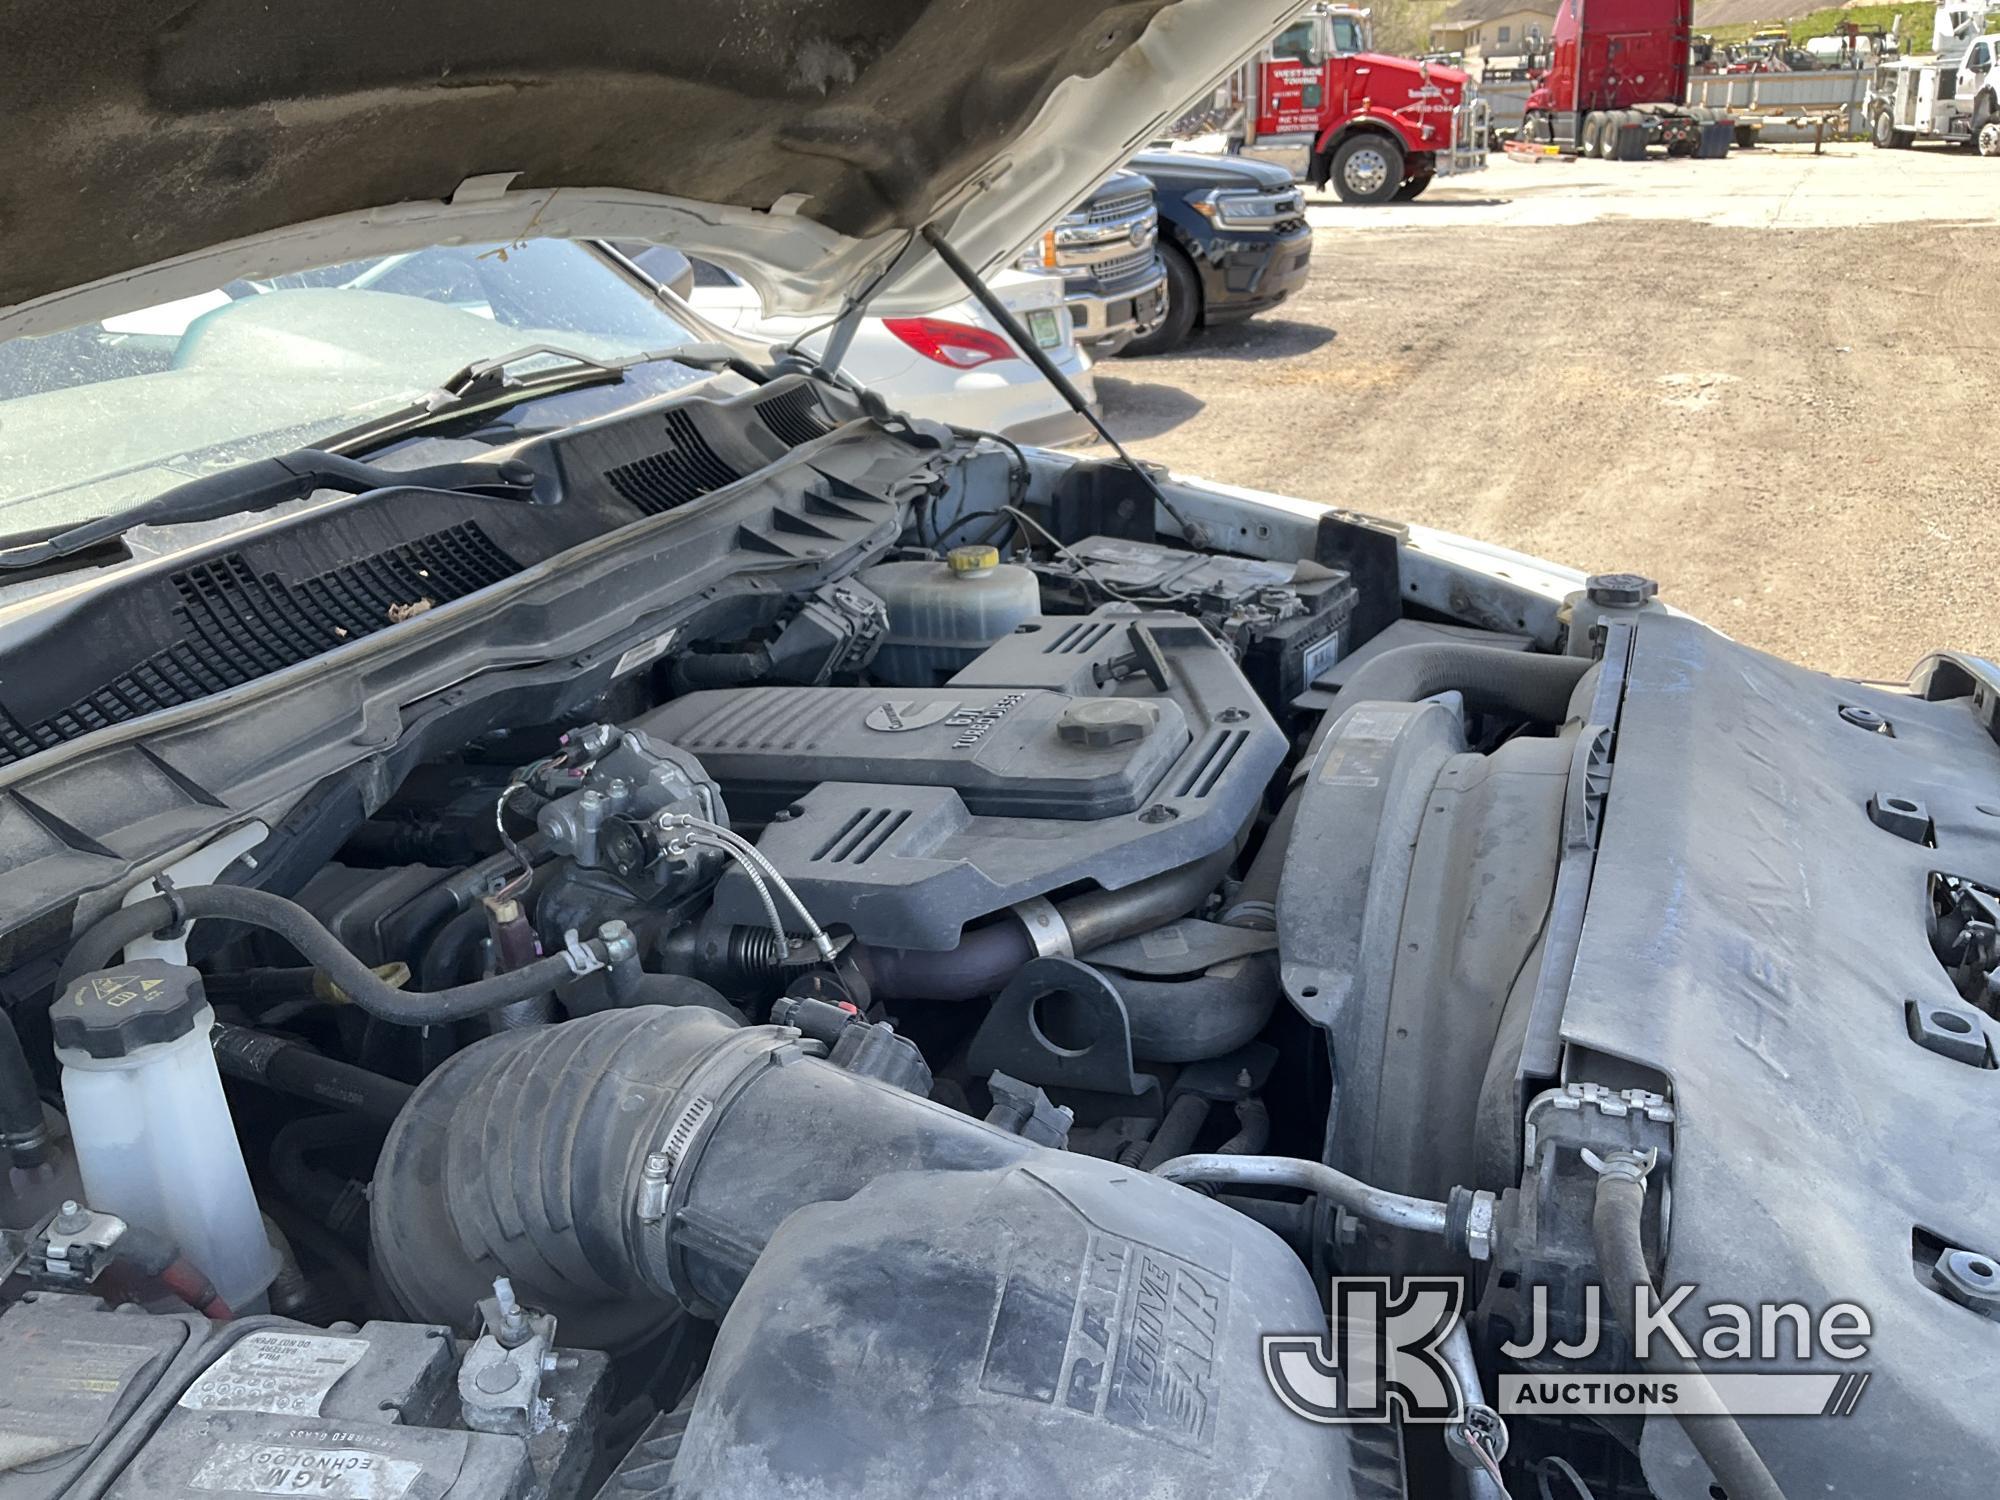 (Castle Rock, CO) 2017 RAM 3500 4x4 Crew-Cab Pickup Truck Runs & Moves) (Check Engine Light On, Tail